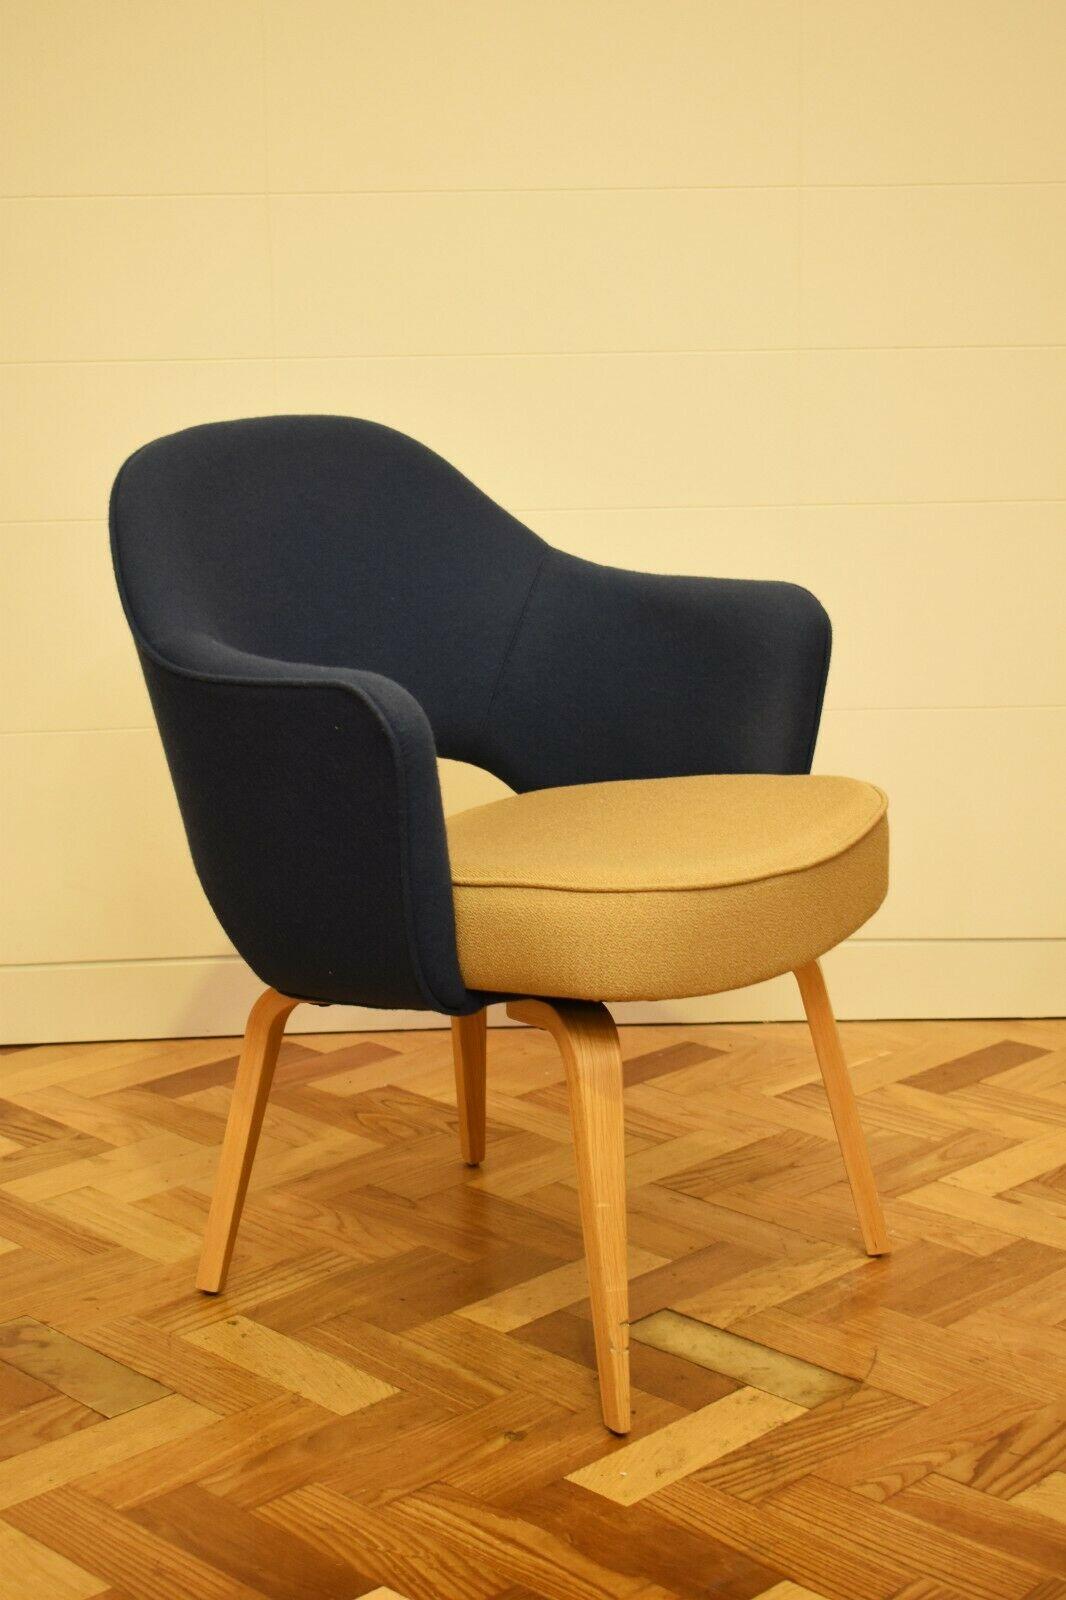 Contemporary edition of the Saarinen conference chair in navy and beige wool.

An iconic design by Eero Saarinen first introduced in 1957, this style of chair revolutionised the notion of what executive seating could be.

With simple